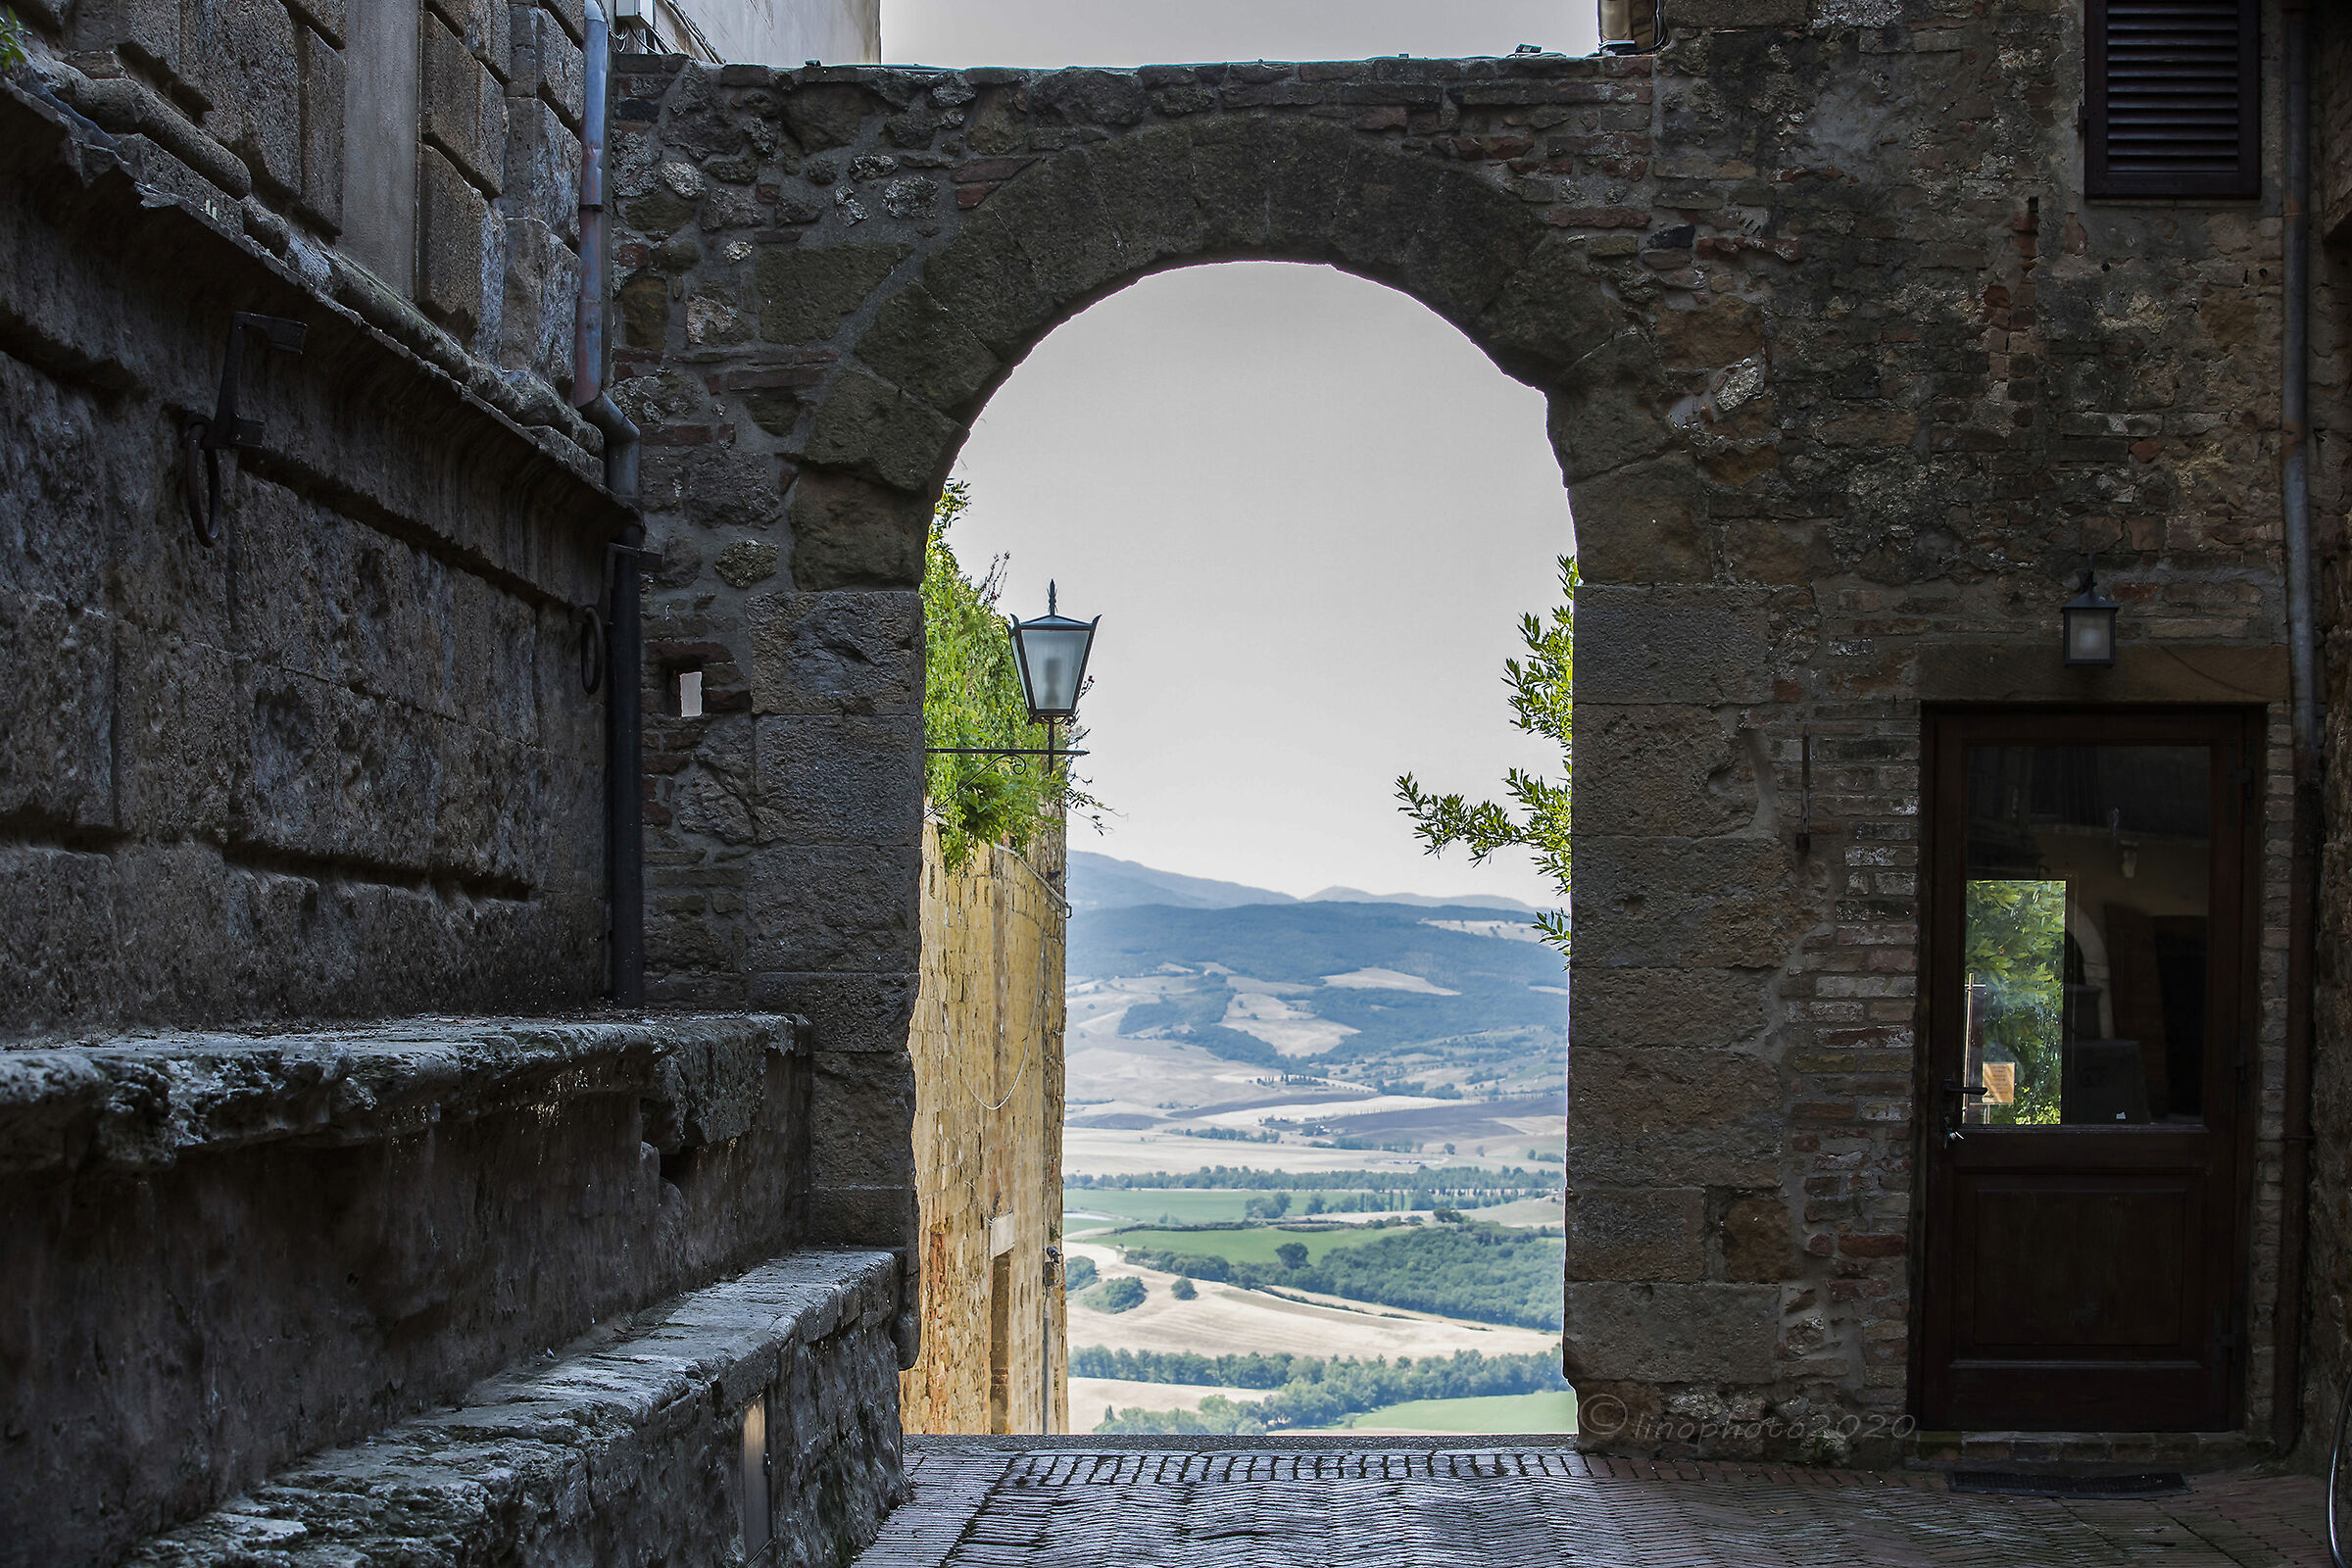 A look at the Val d'Orcia....